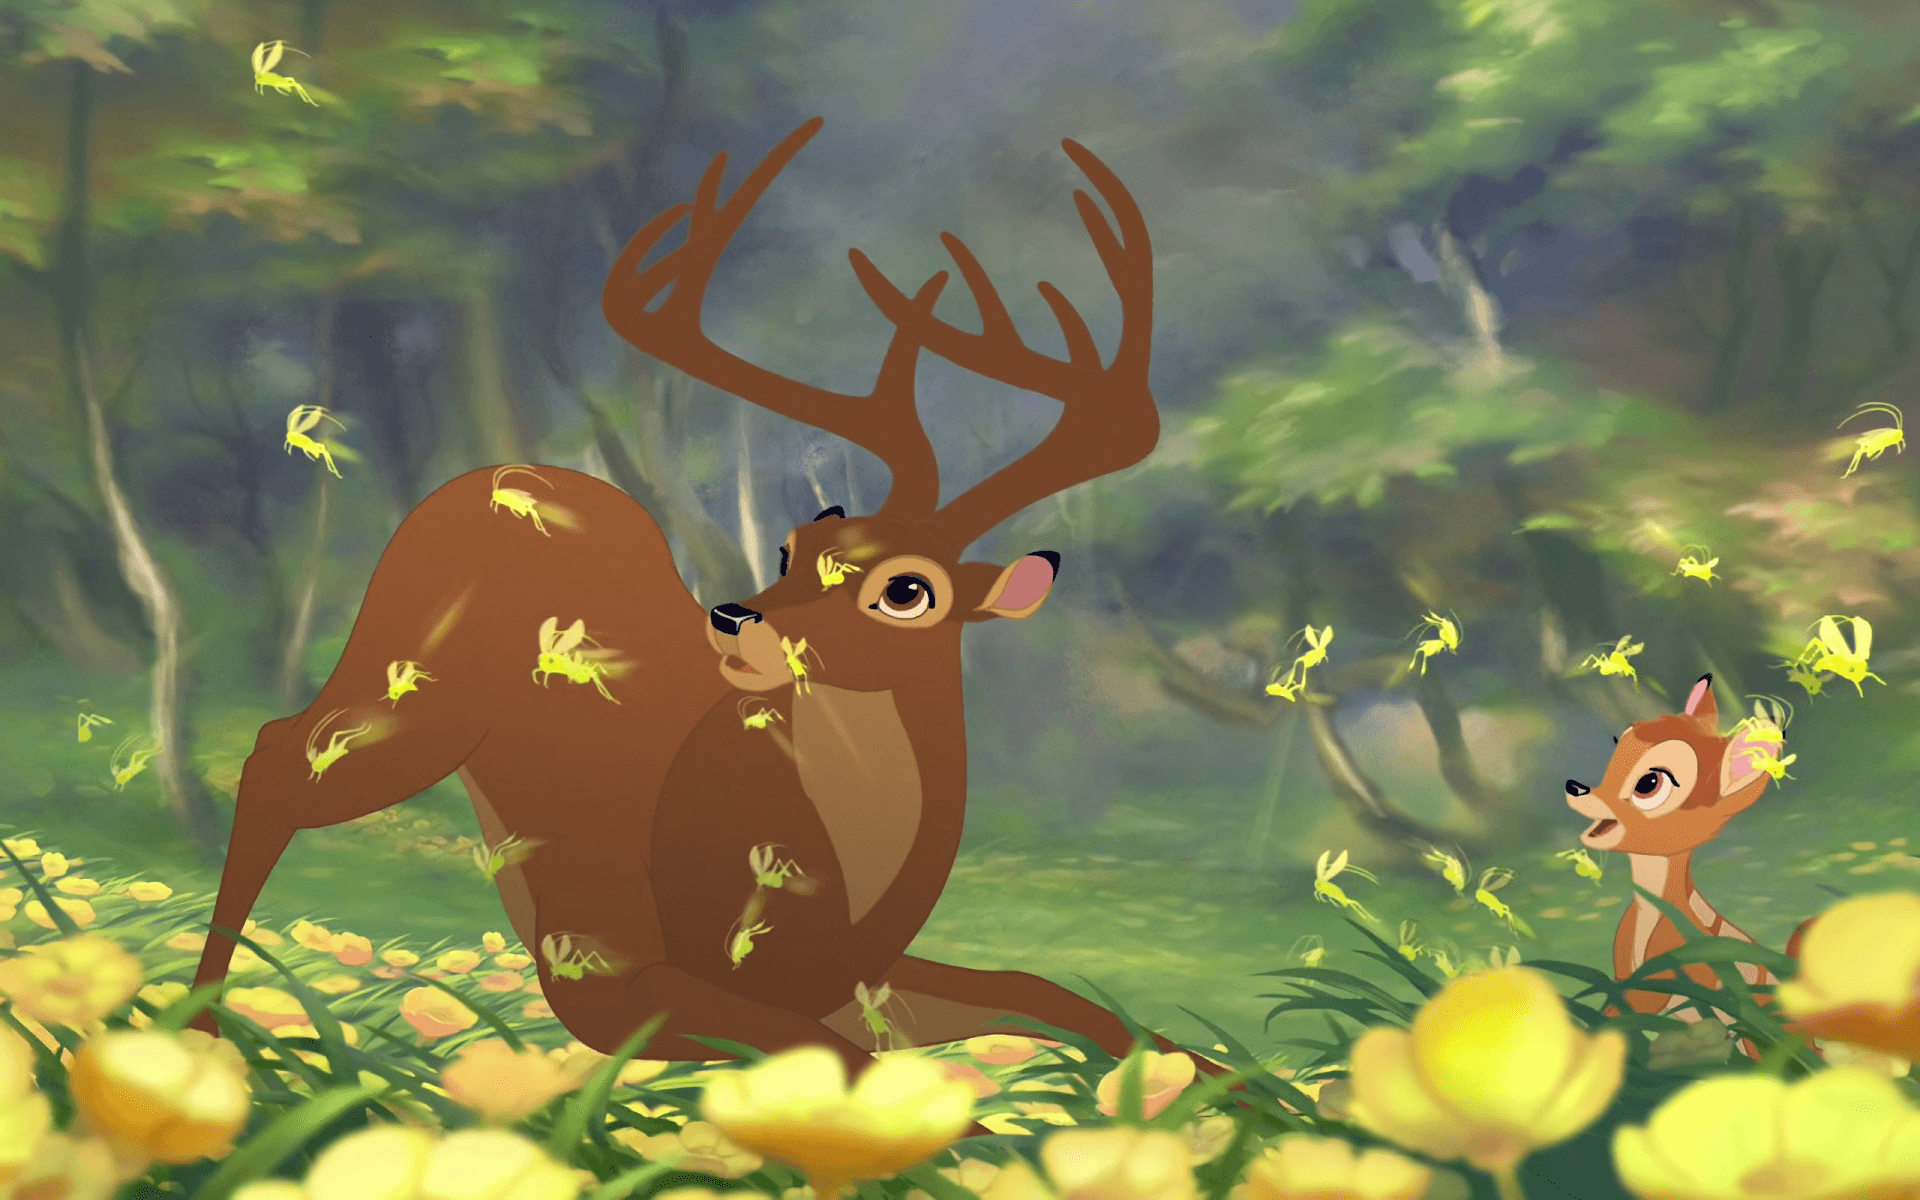 Bambi strikes a graceful pose in the forest